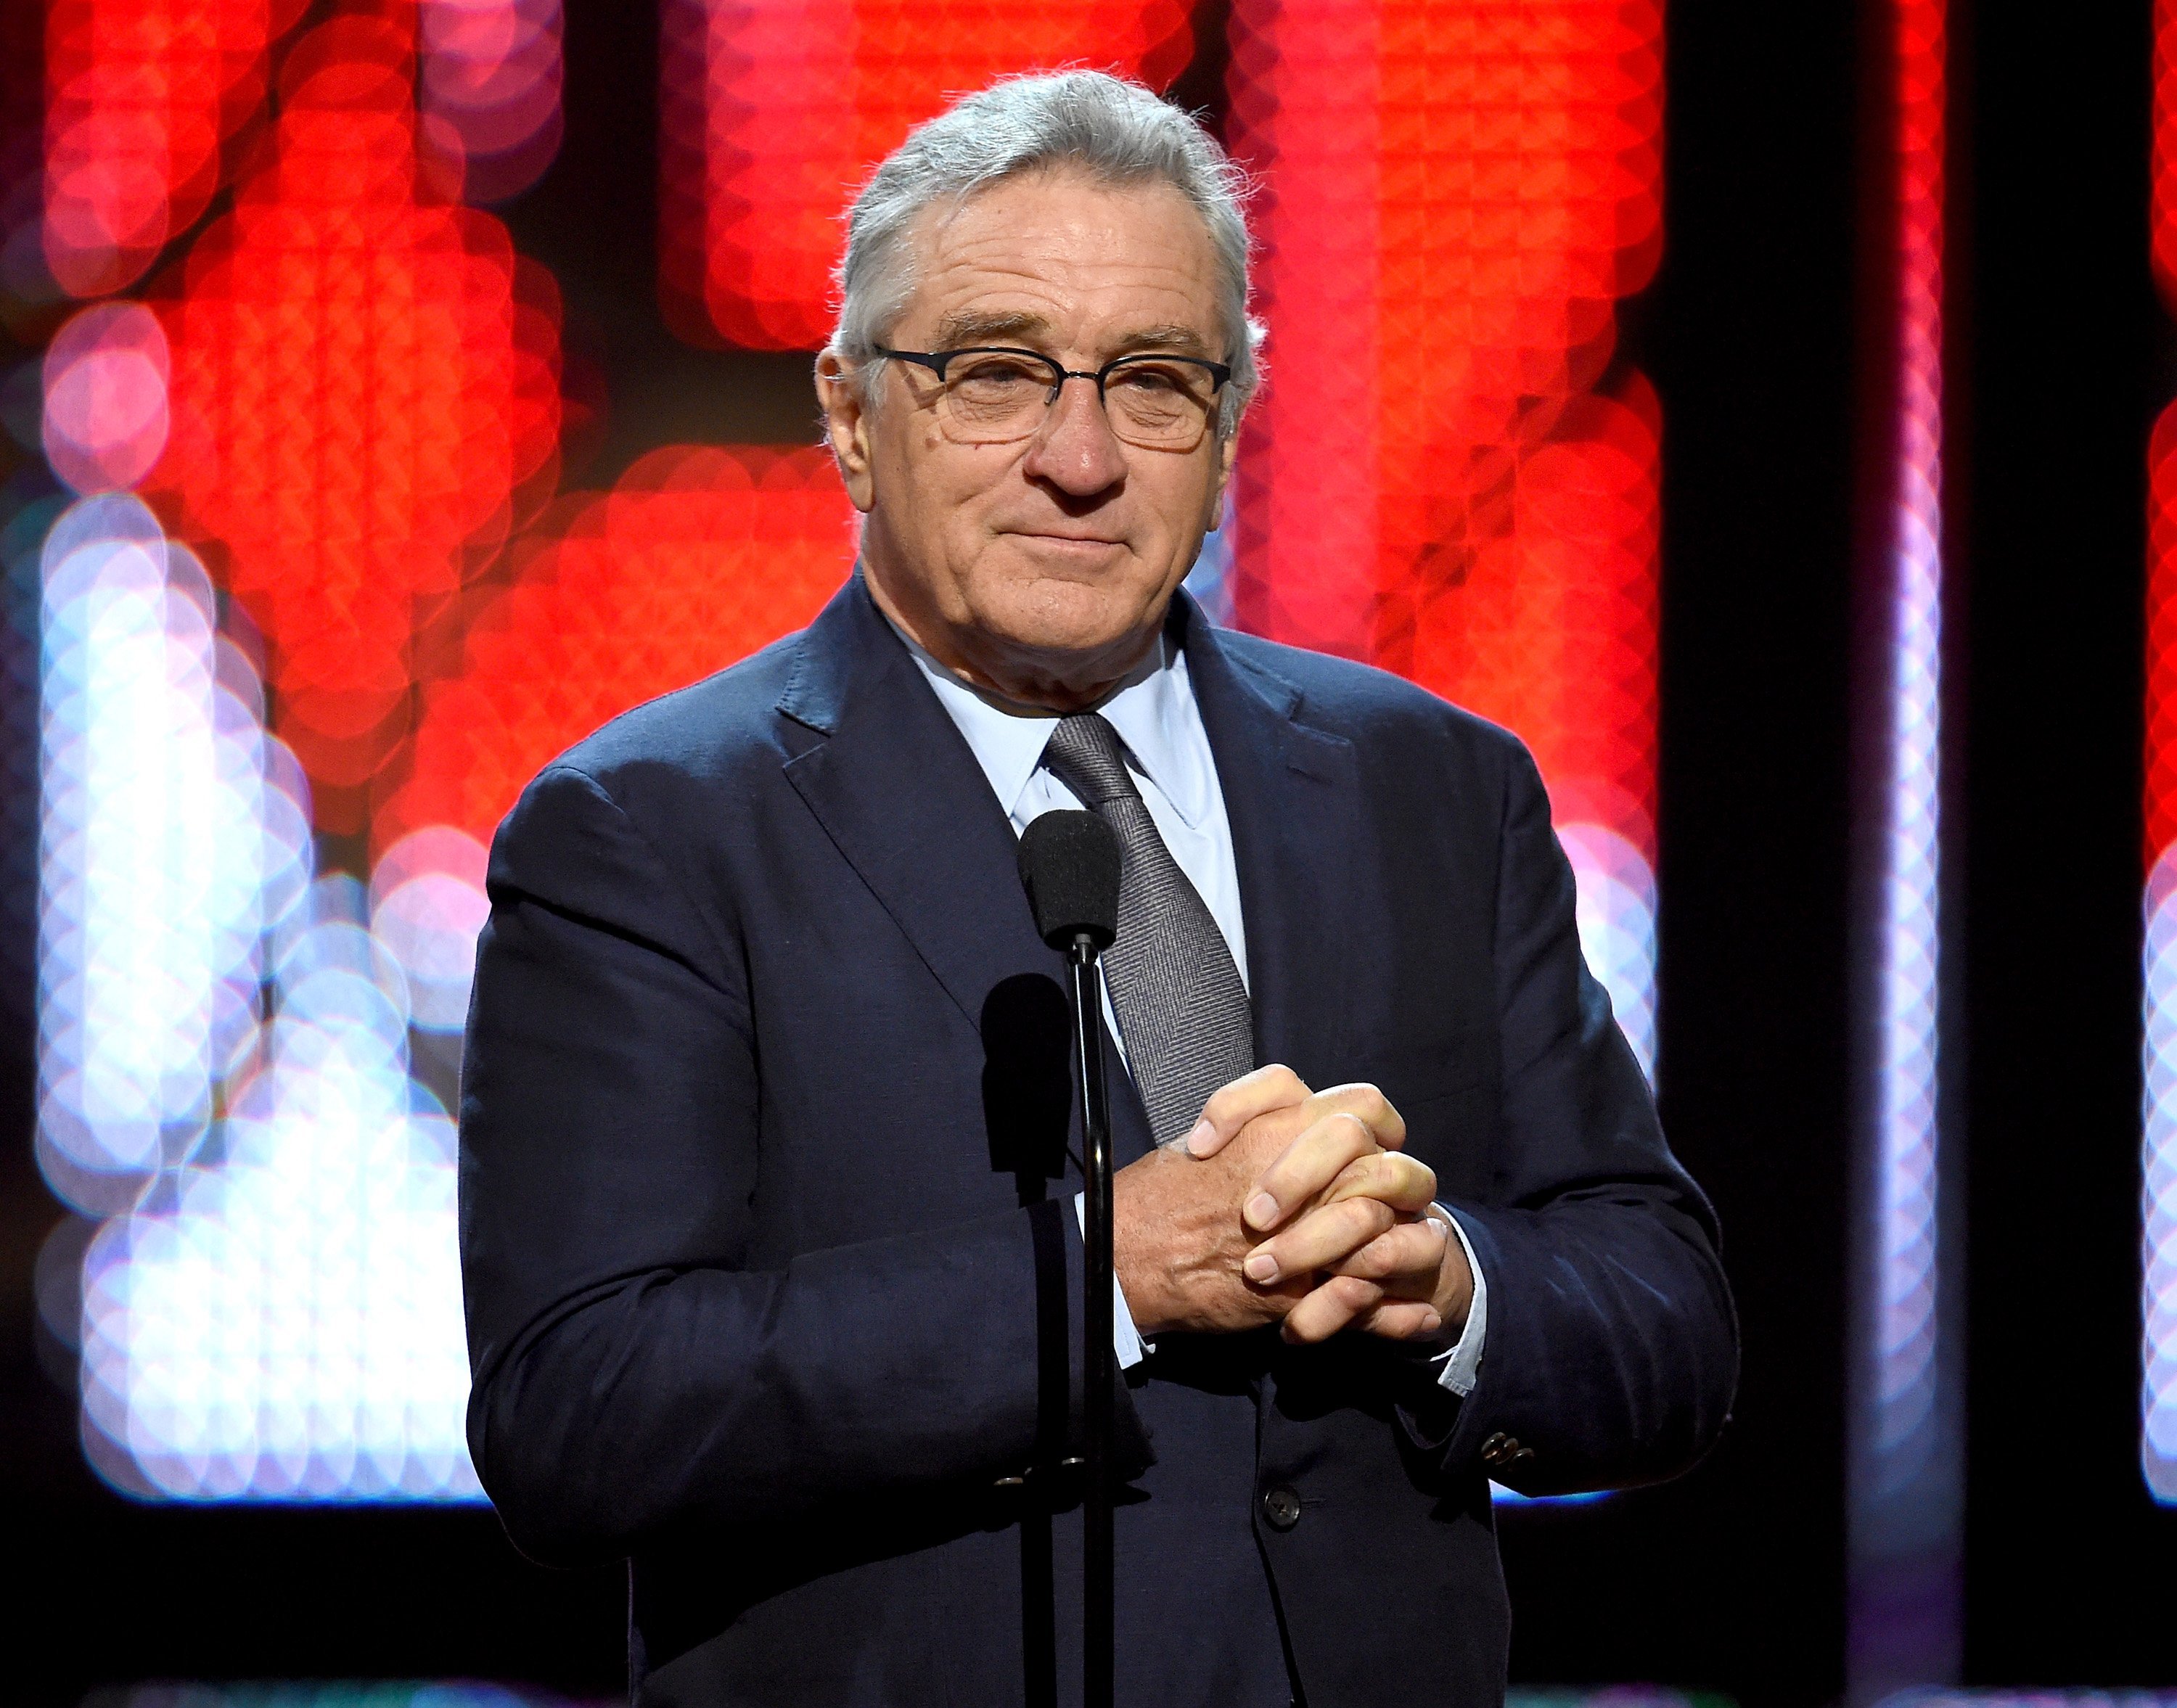 Actor Robert De Niro speaks onstage during Spike TV's 10th Annual Guys Choice Awards at Sony Pictures Studios on June 4, 2016, in Culver City, California. | Source: Getty Images.